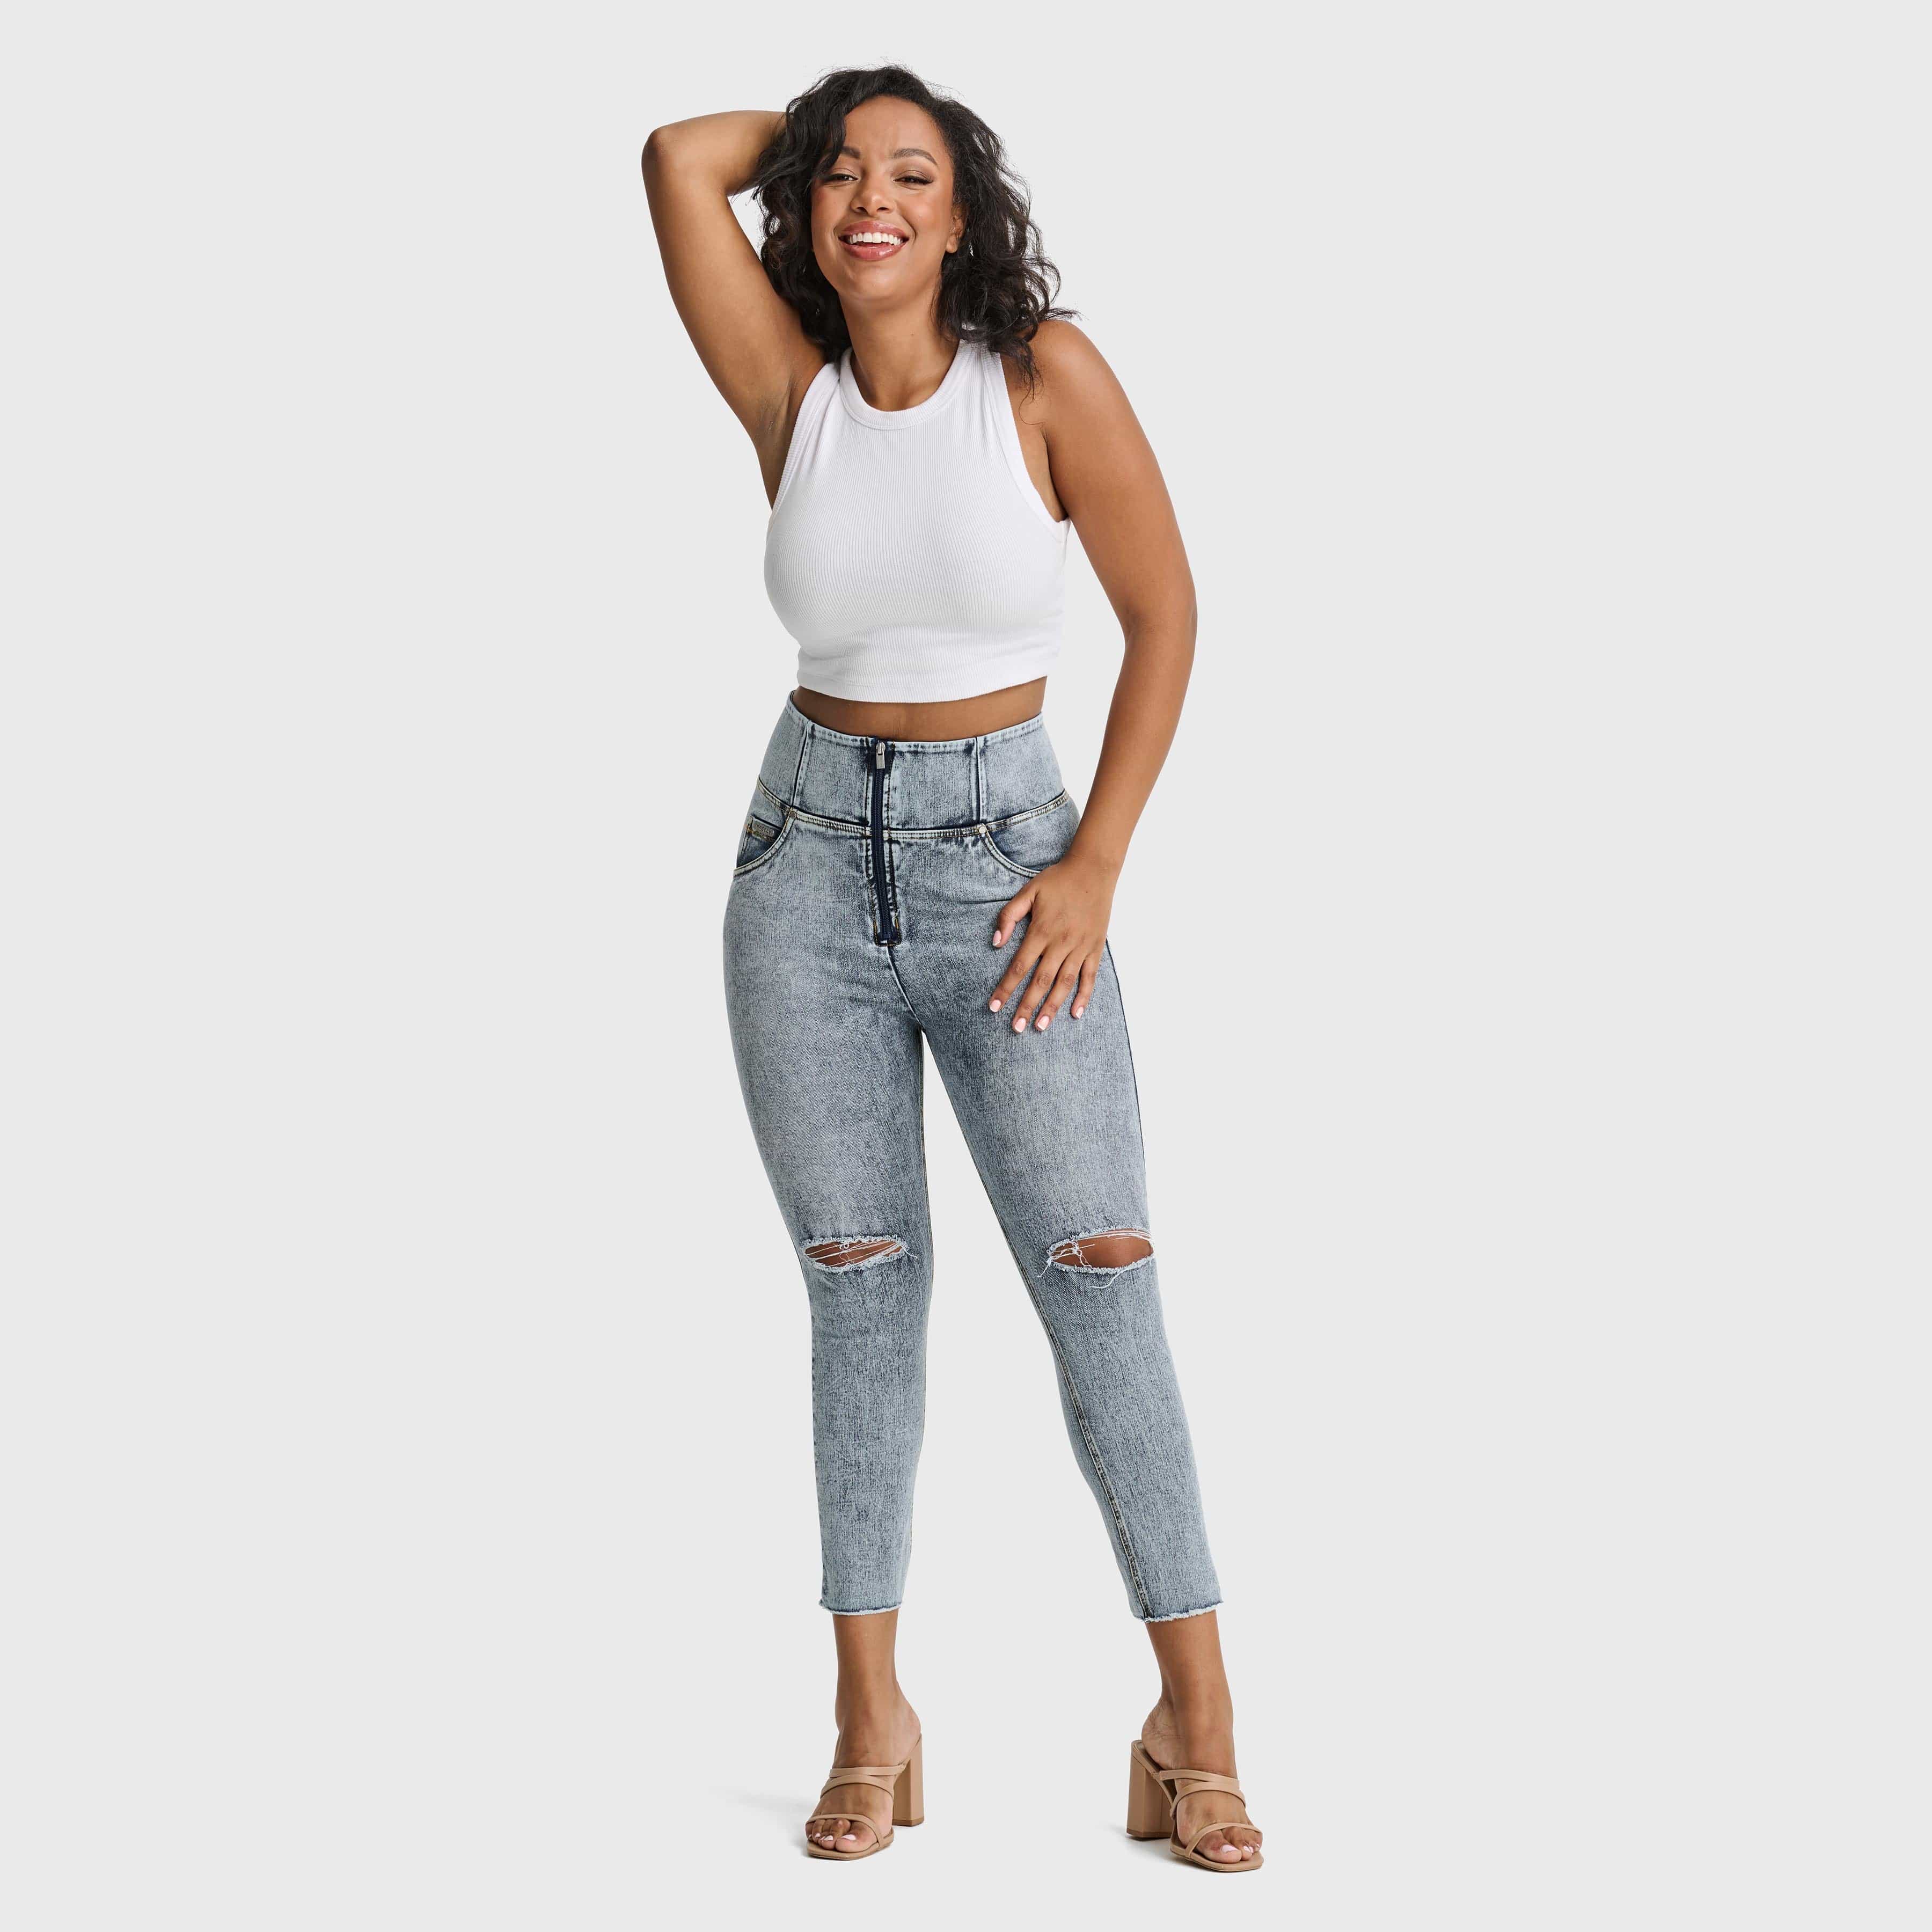 WR.UP® Snug Curvy Ripped Jeans - High Waisted - 7/8 Length - Blue Stonewash + Yellow Stitching 3